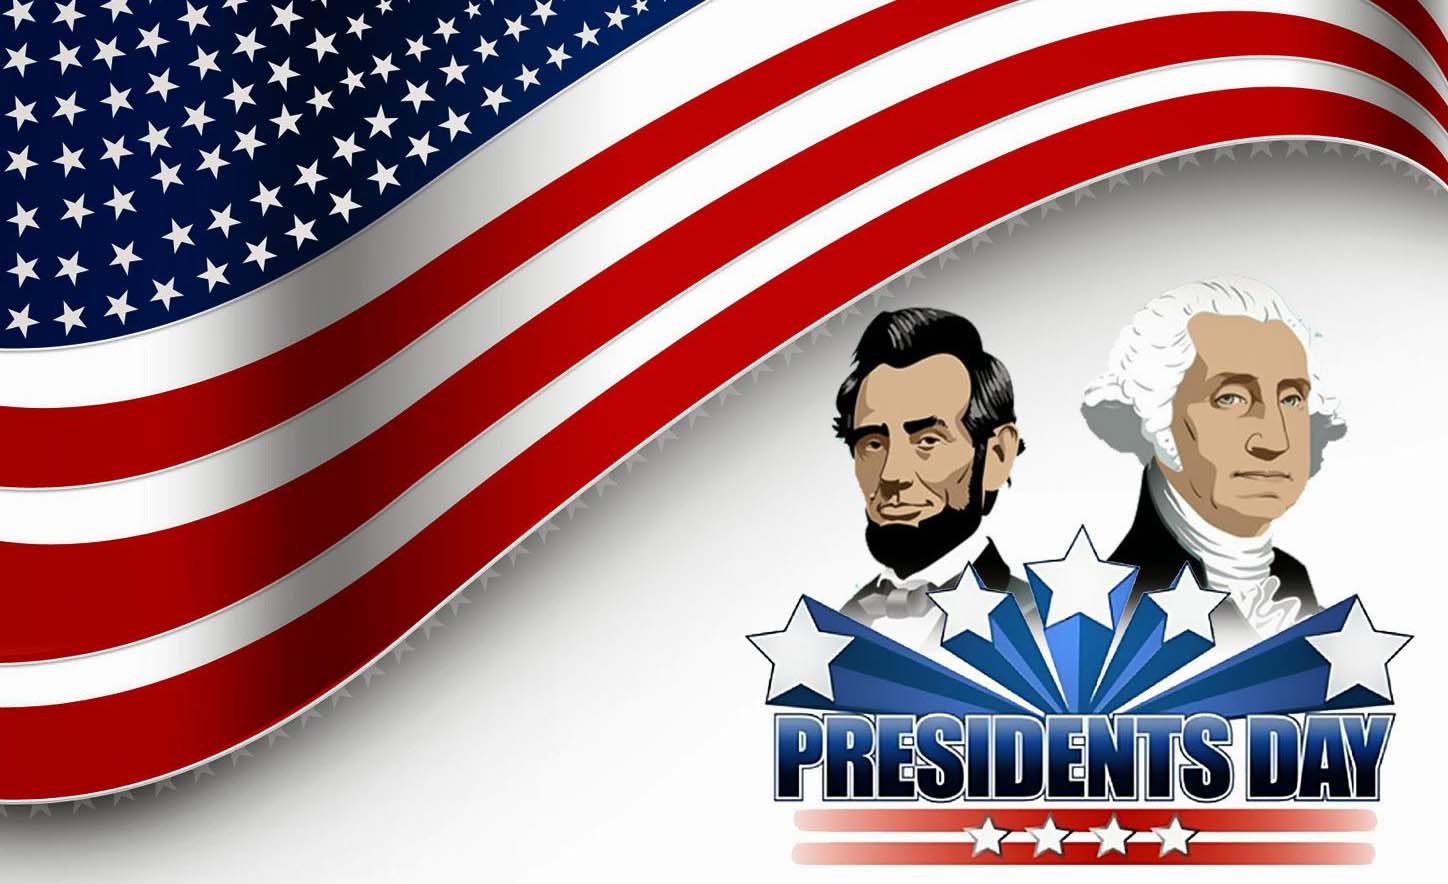 The Bank will be closed in observance of President's Day